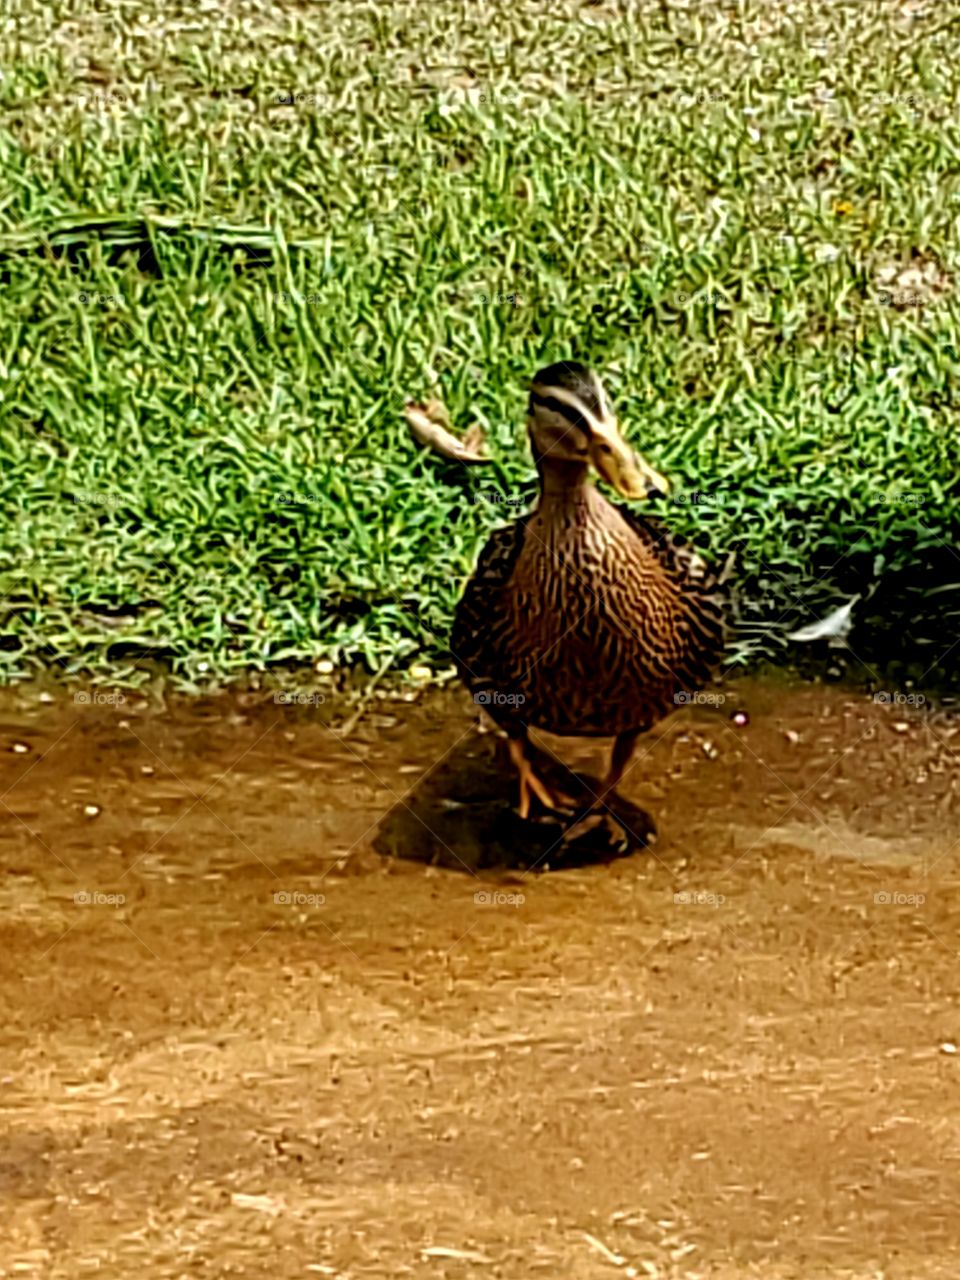 My mallard very curious about what I am doing outside in garden